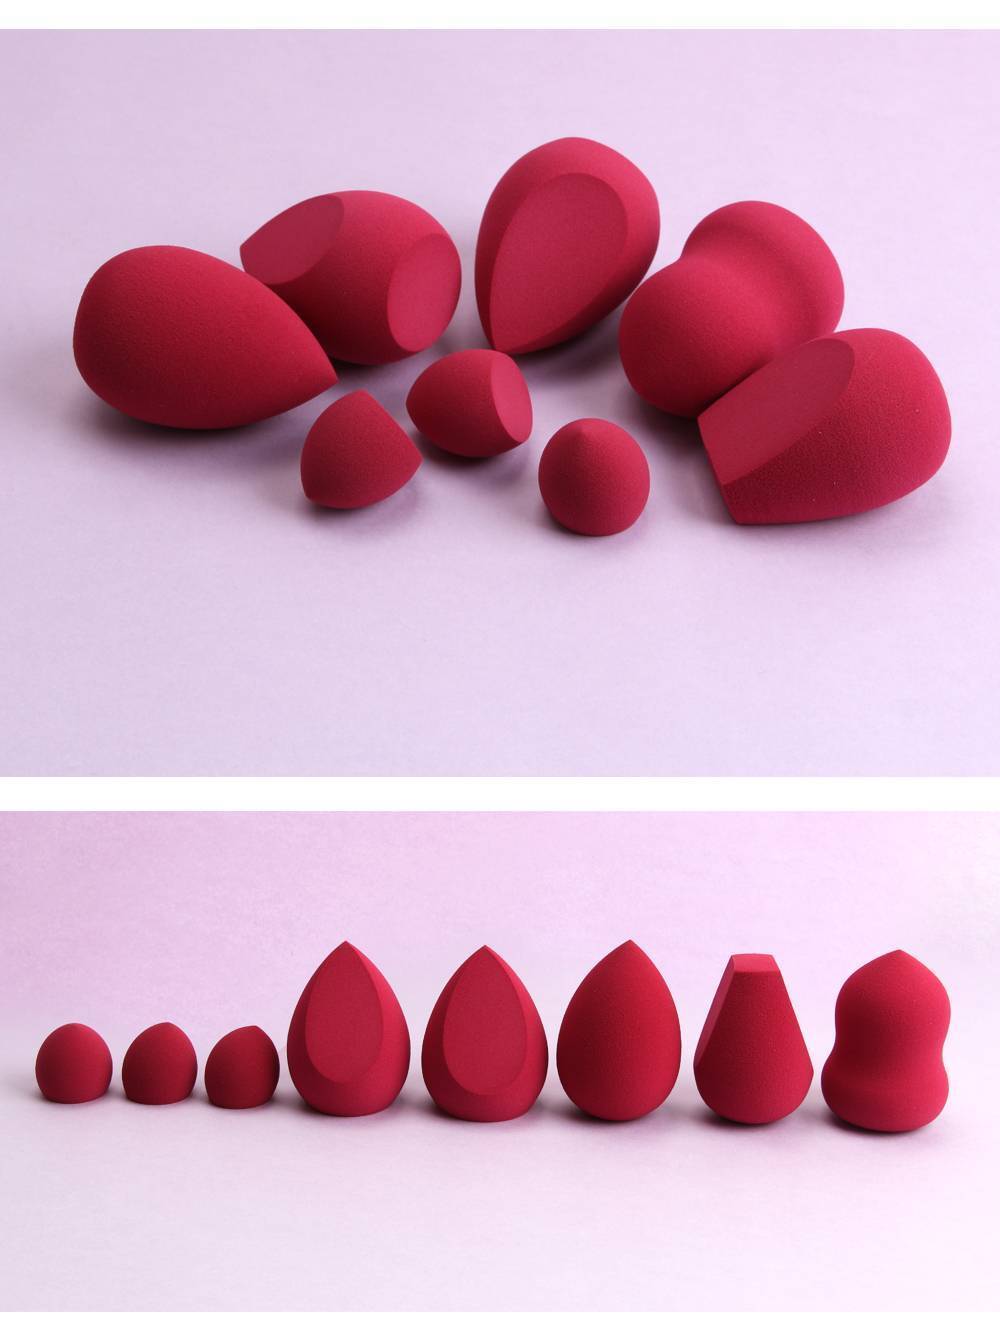 MAANGE 8PCS MAKEUP SPONGE WITH A BOX RED Image 1